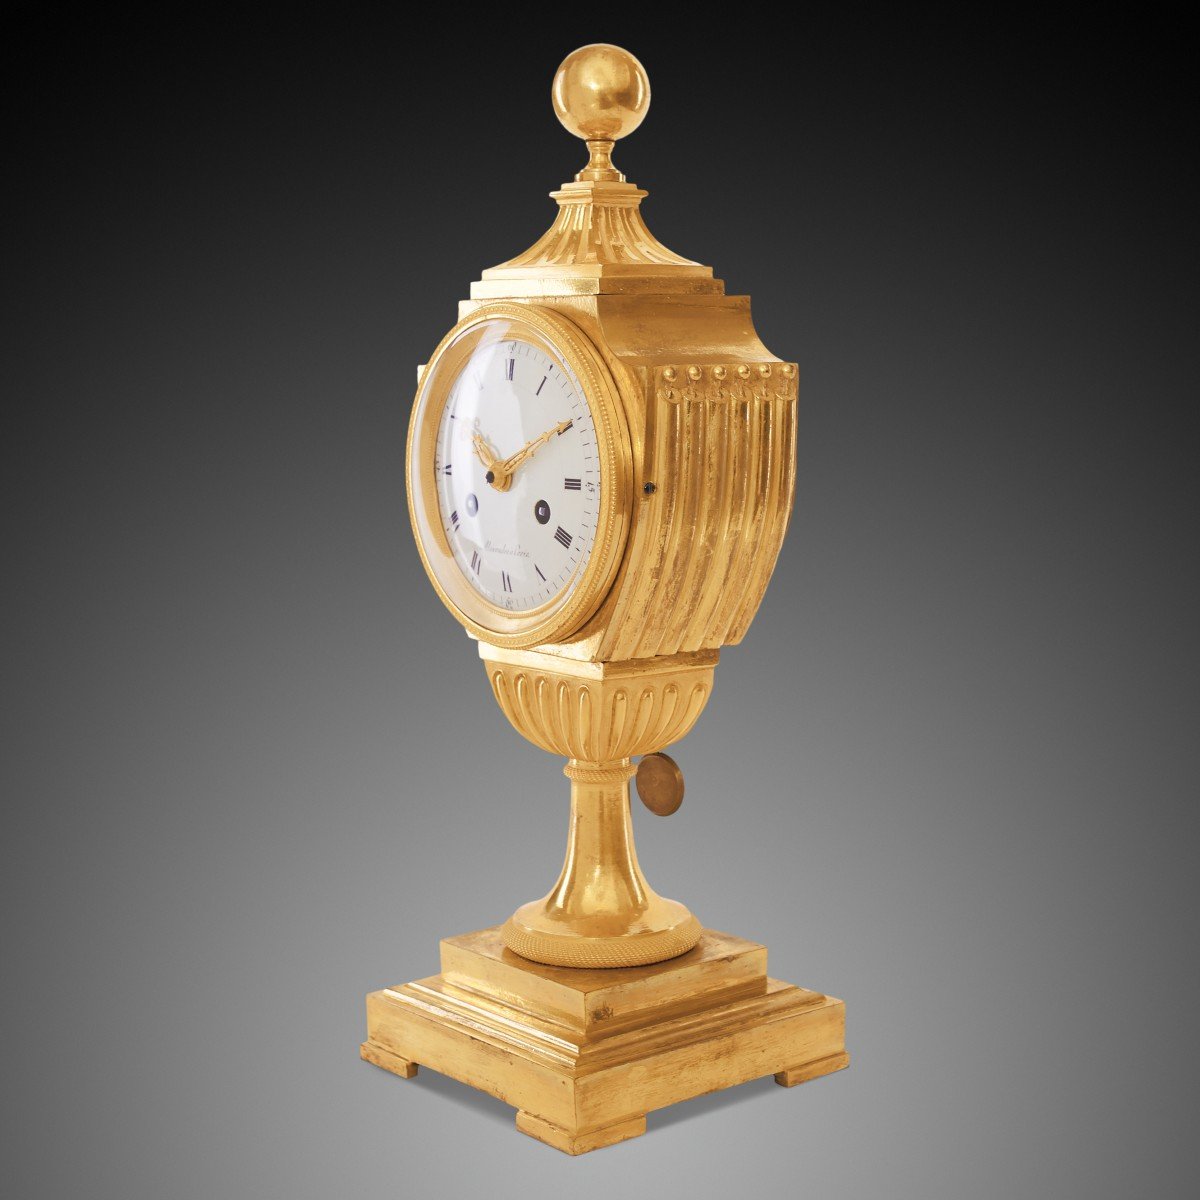 19th Century Empire Style Mantel Clock By Alexandre In Paris.-photo-3